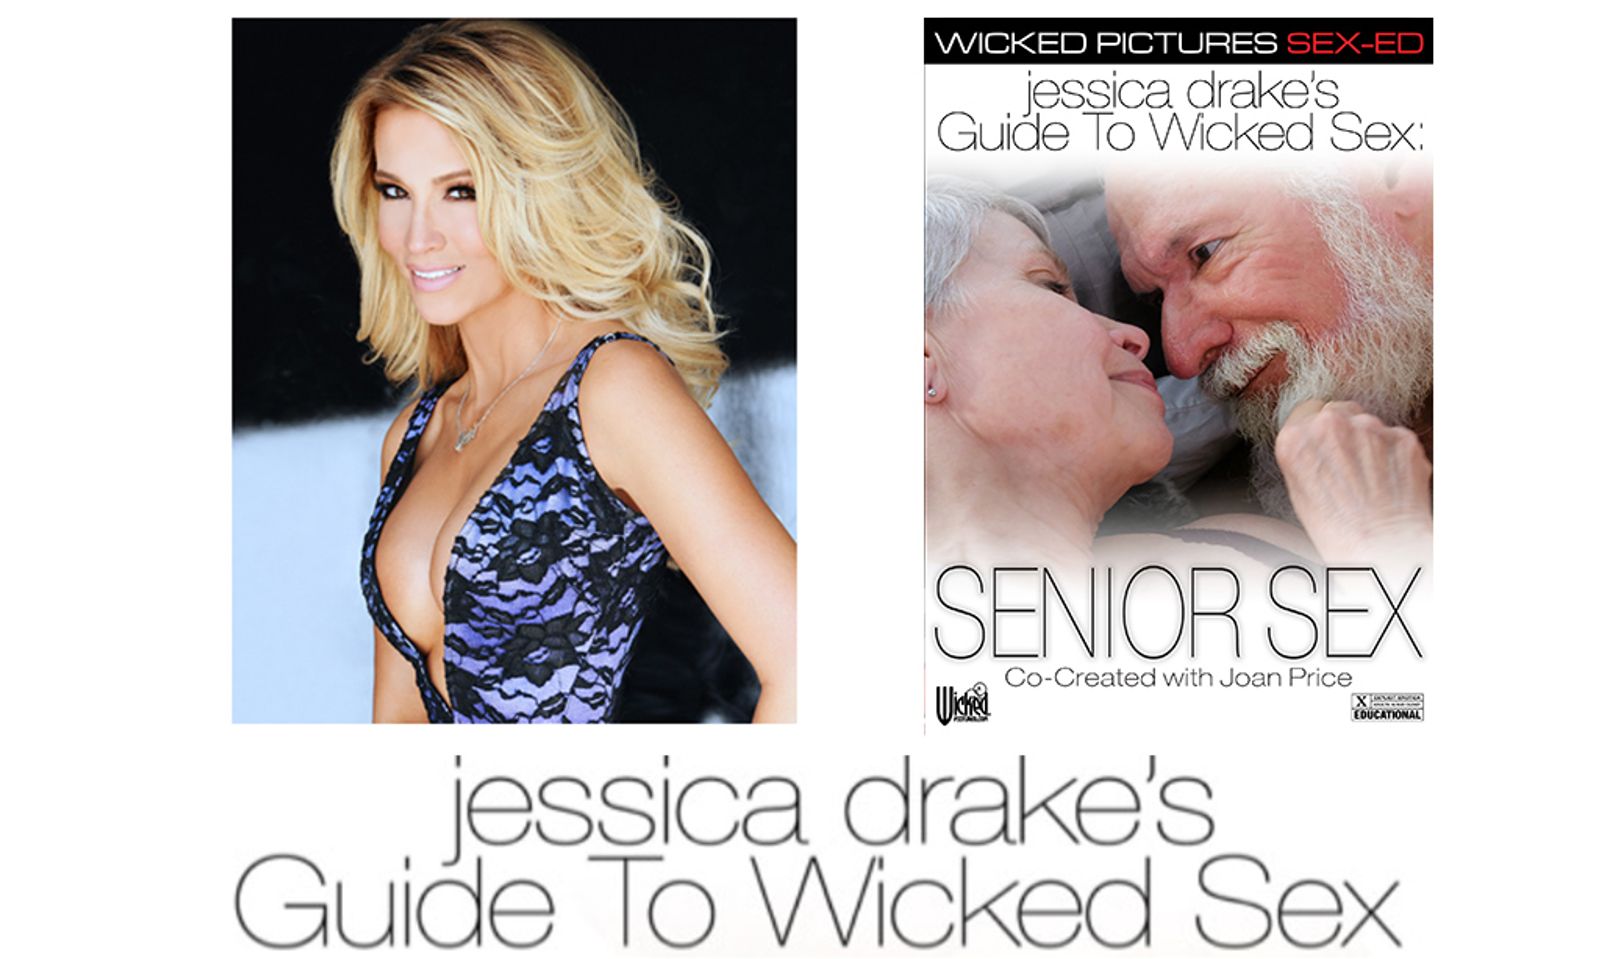 Drake's New 'Guide to Wicked Sex' to Premiere at Woodhull Summit